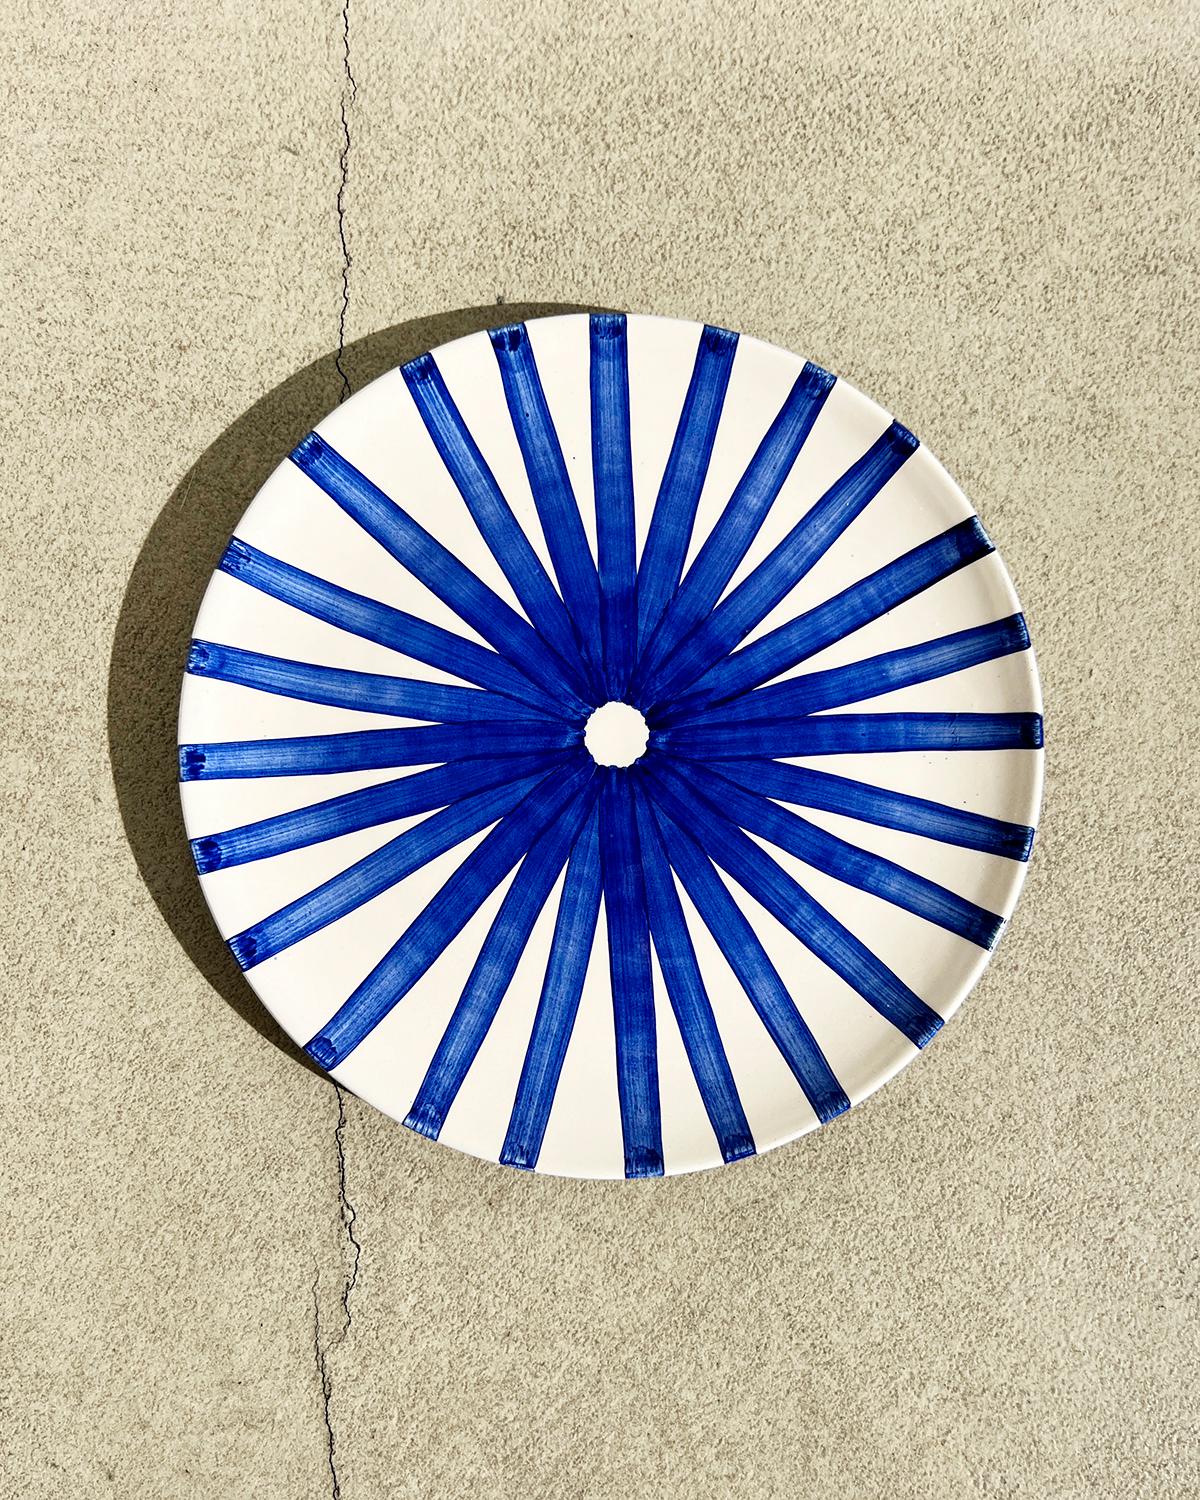 Casa Cubista Blue Ray Striped Terracotta Dinner Plates In New Condition For Sale In West Hollywood, CA